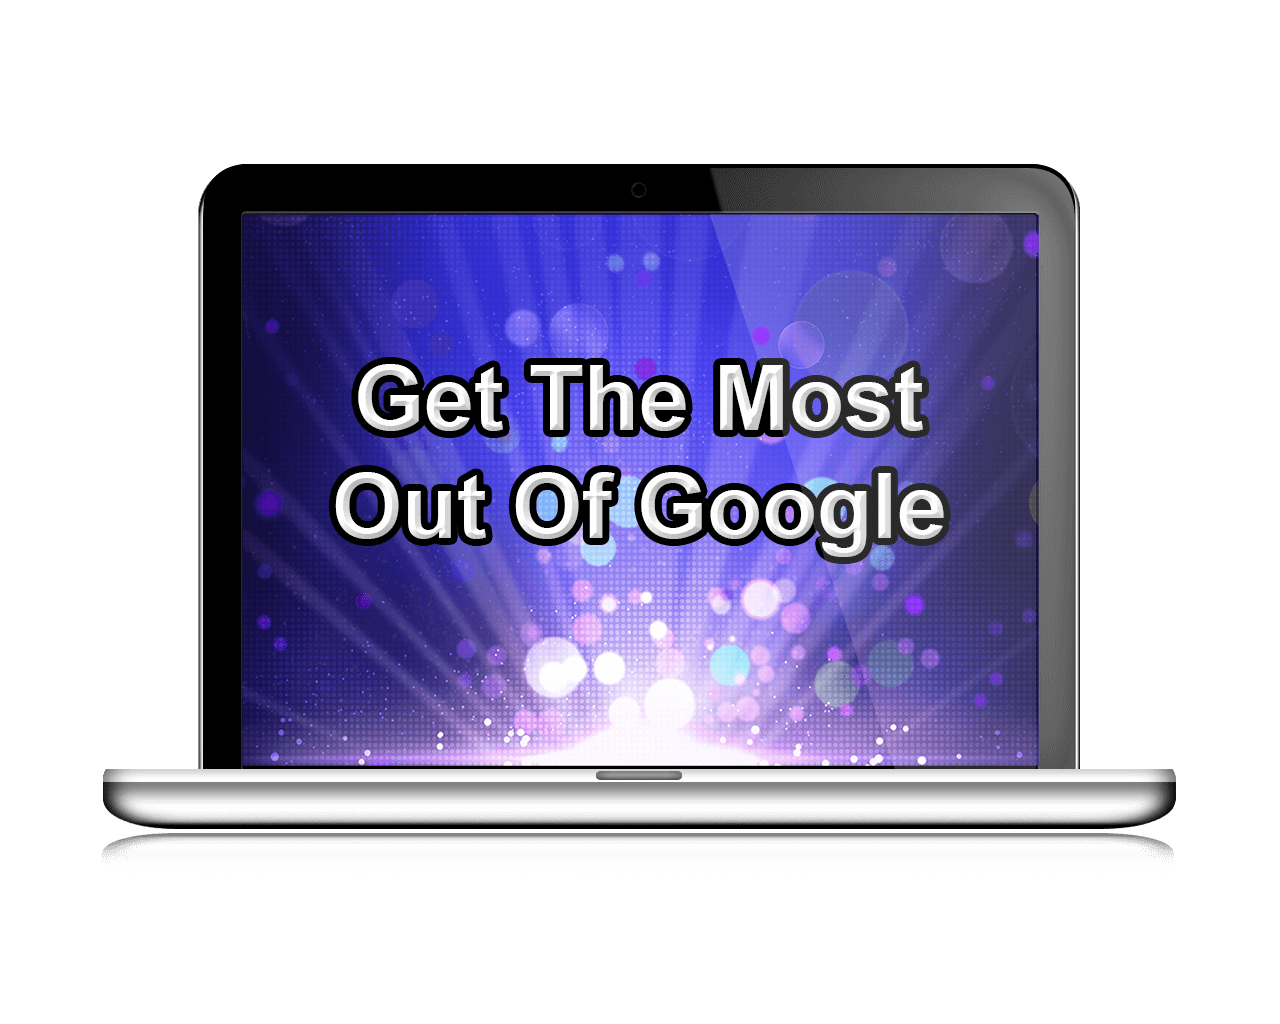 Get The Most Out Of Google Image